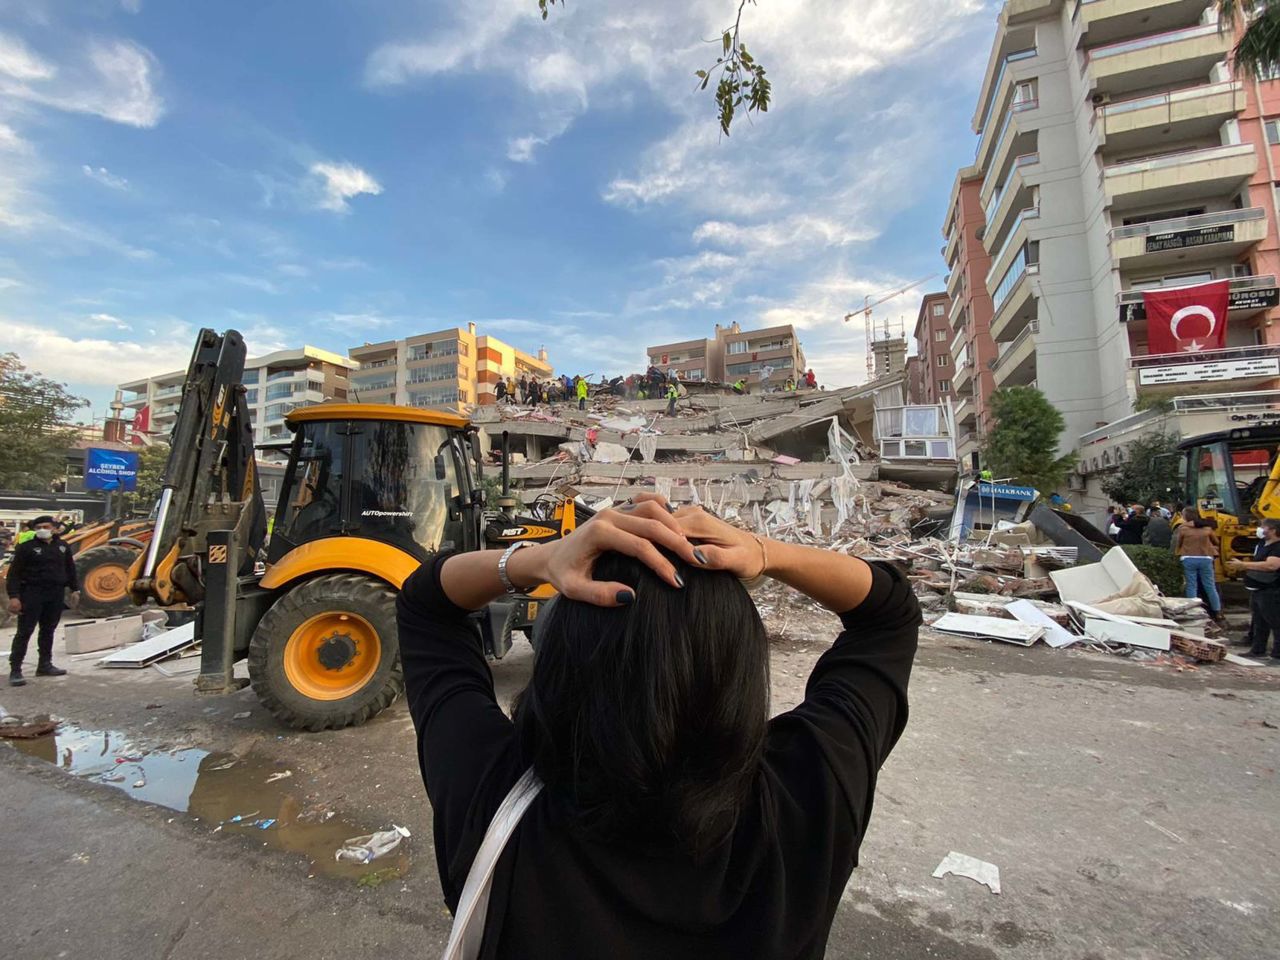 A woman reacts as search-and-rescue teams work at a building site in Izmir.